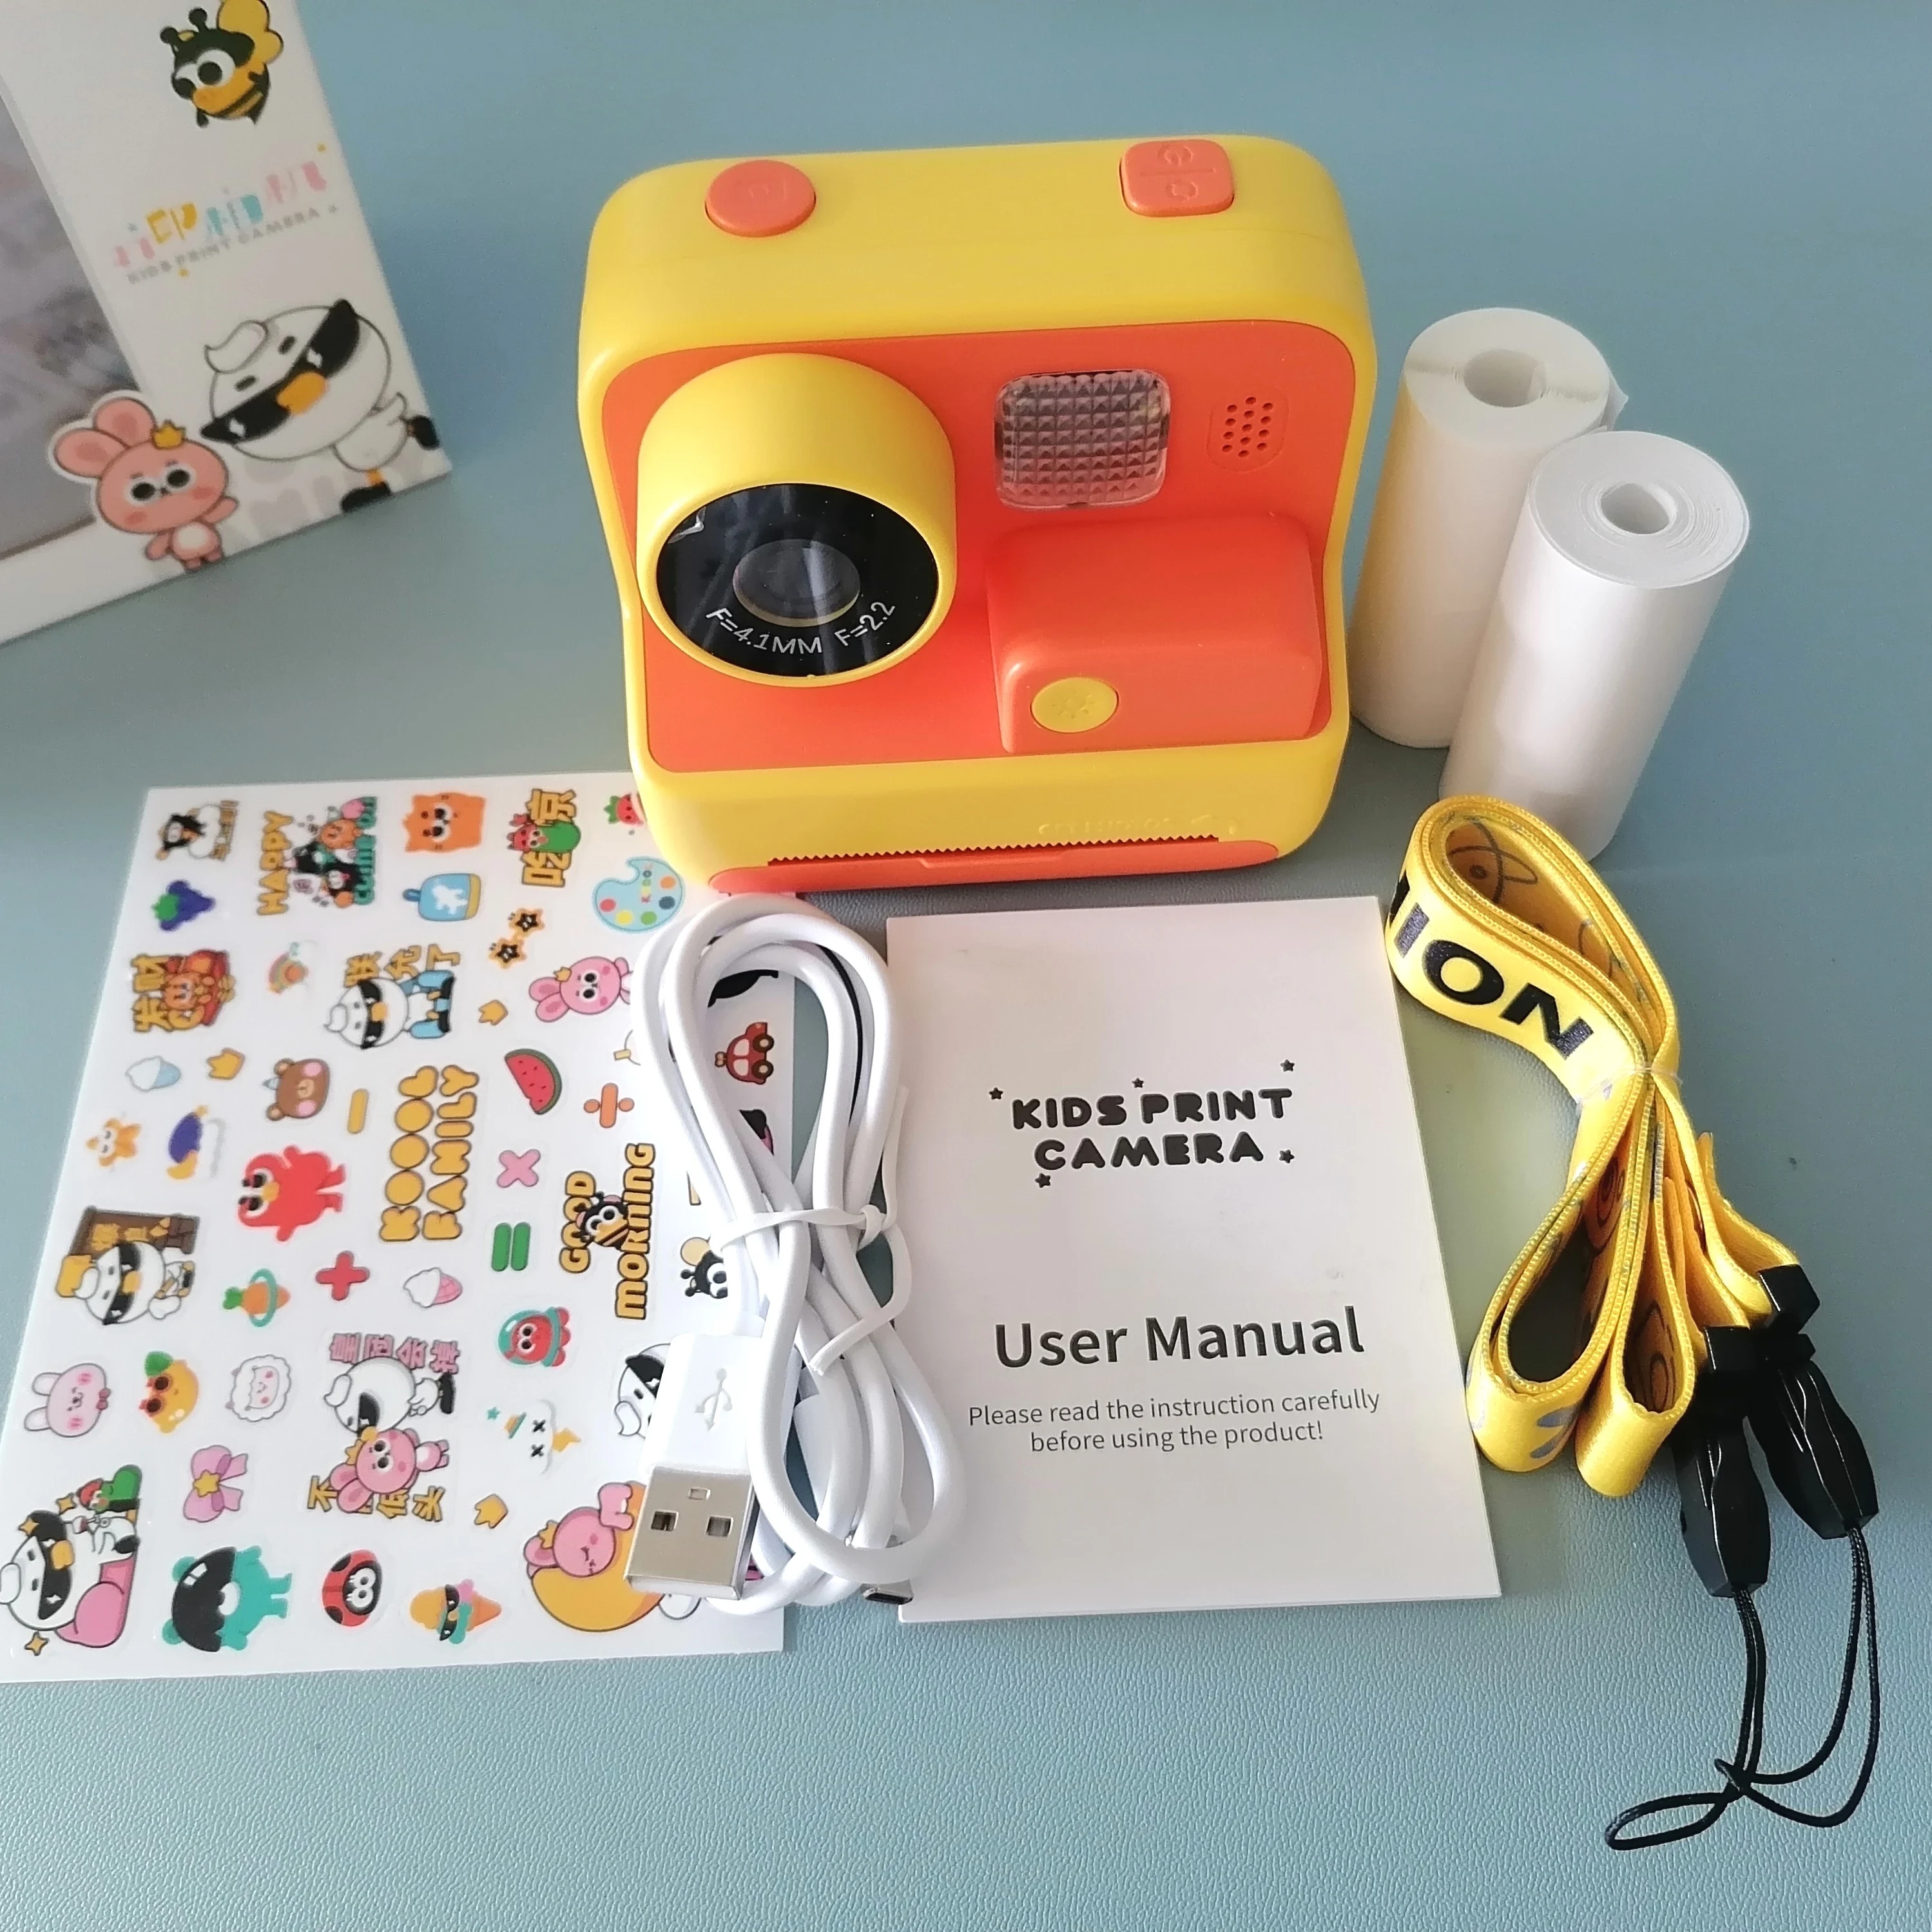 S9e05e97a3a3d470d852e3a8c3621139c7 Instant Print Kids Camera 2.0" 1080P Video Photo with Thermal Print Paper